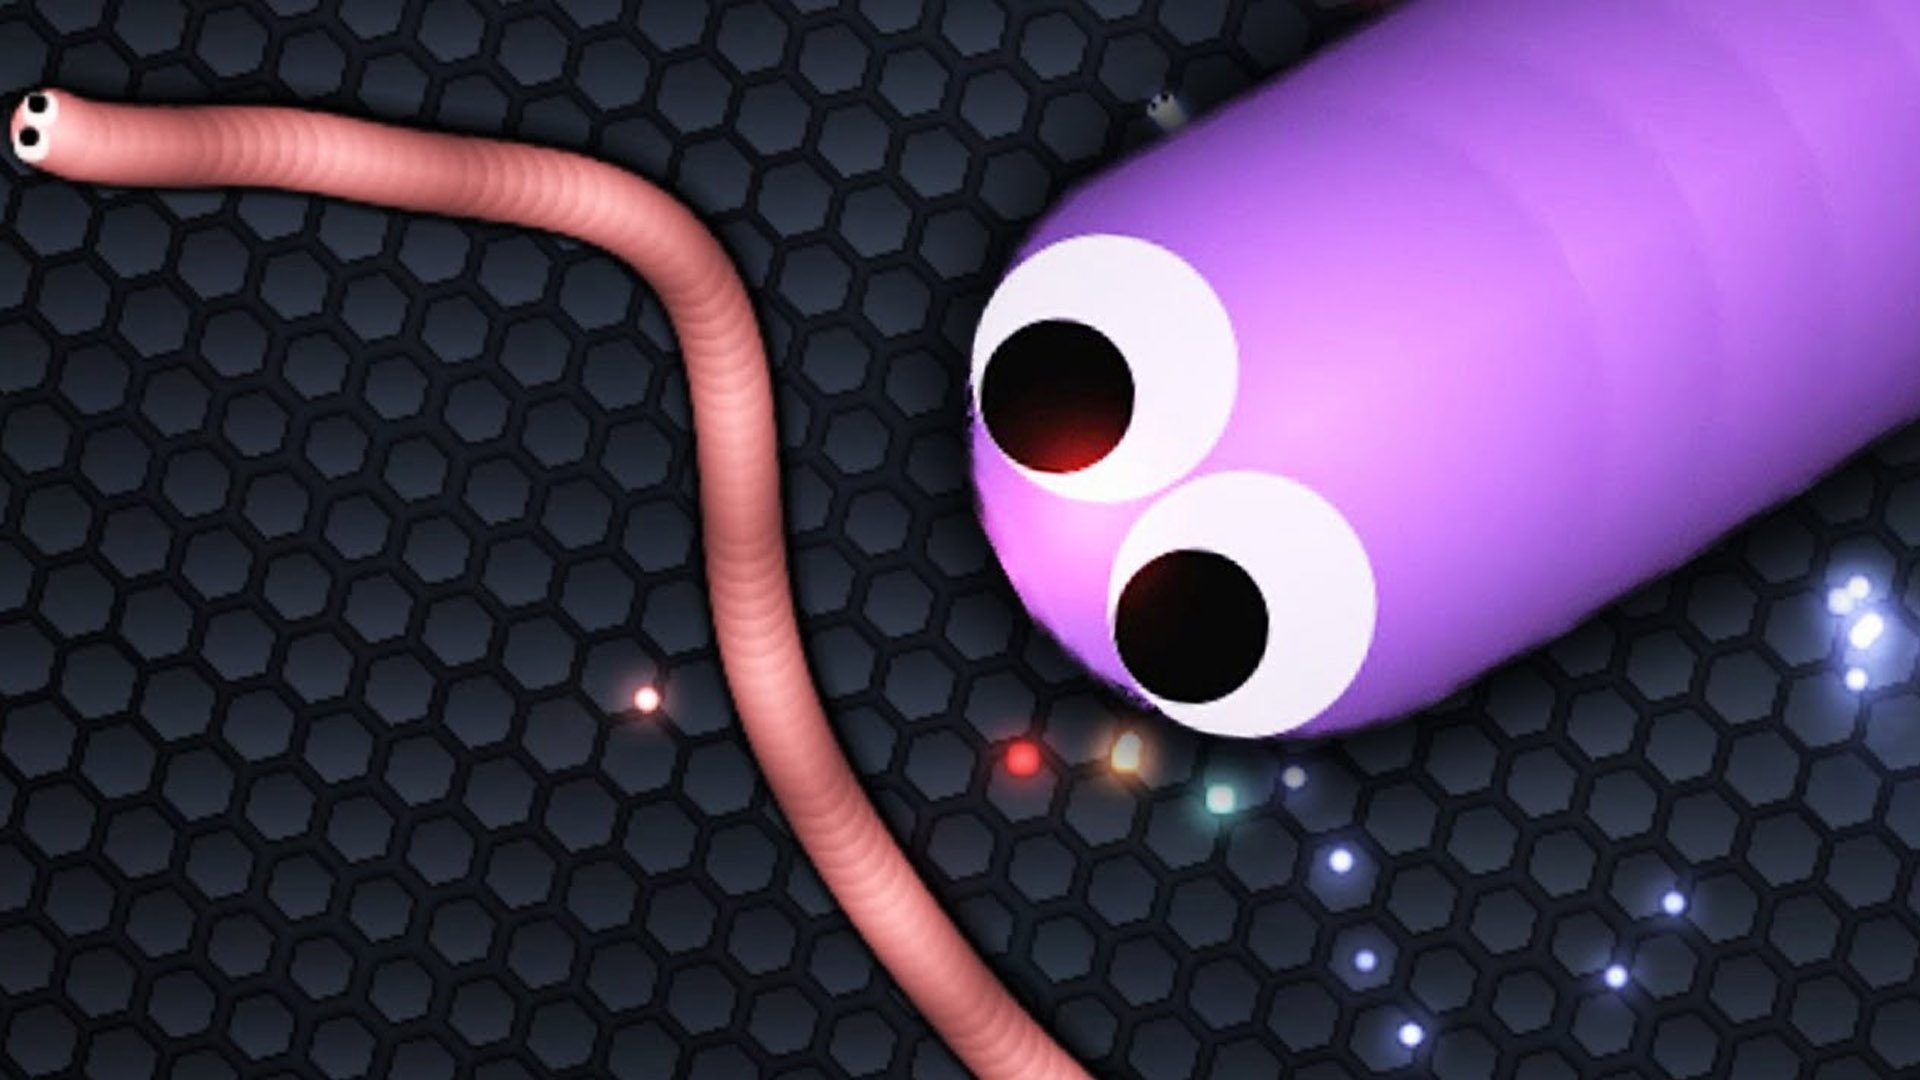 Slither.io Codes (DEC 2023) [UPDATED] - UCN Game